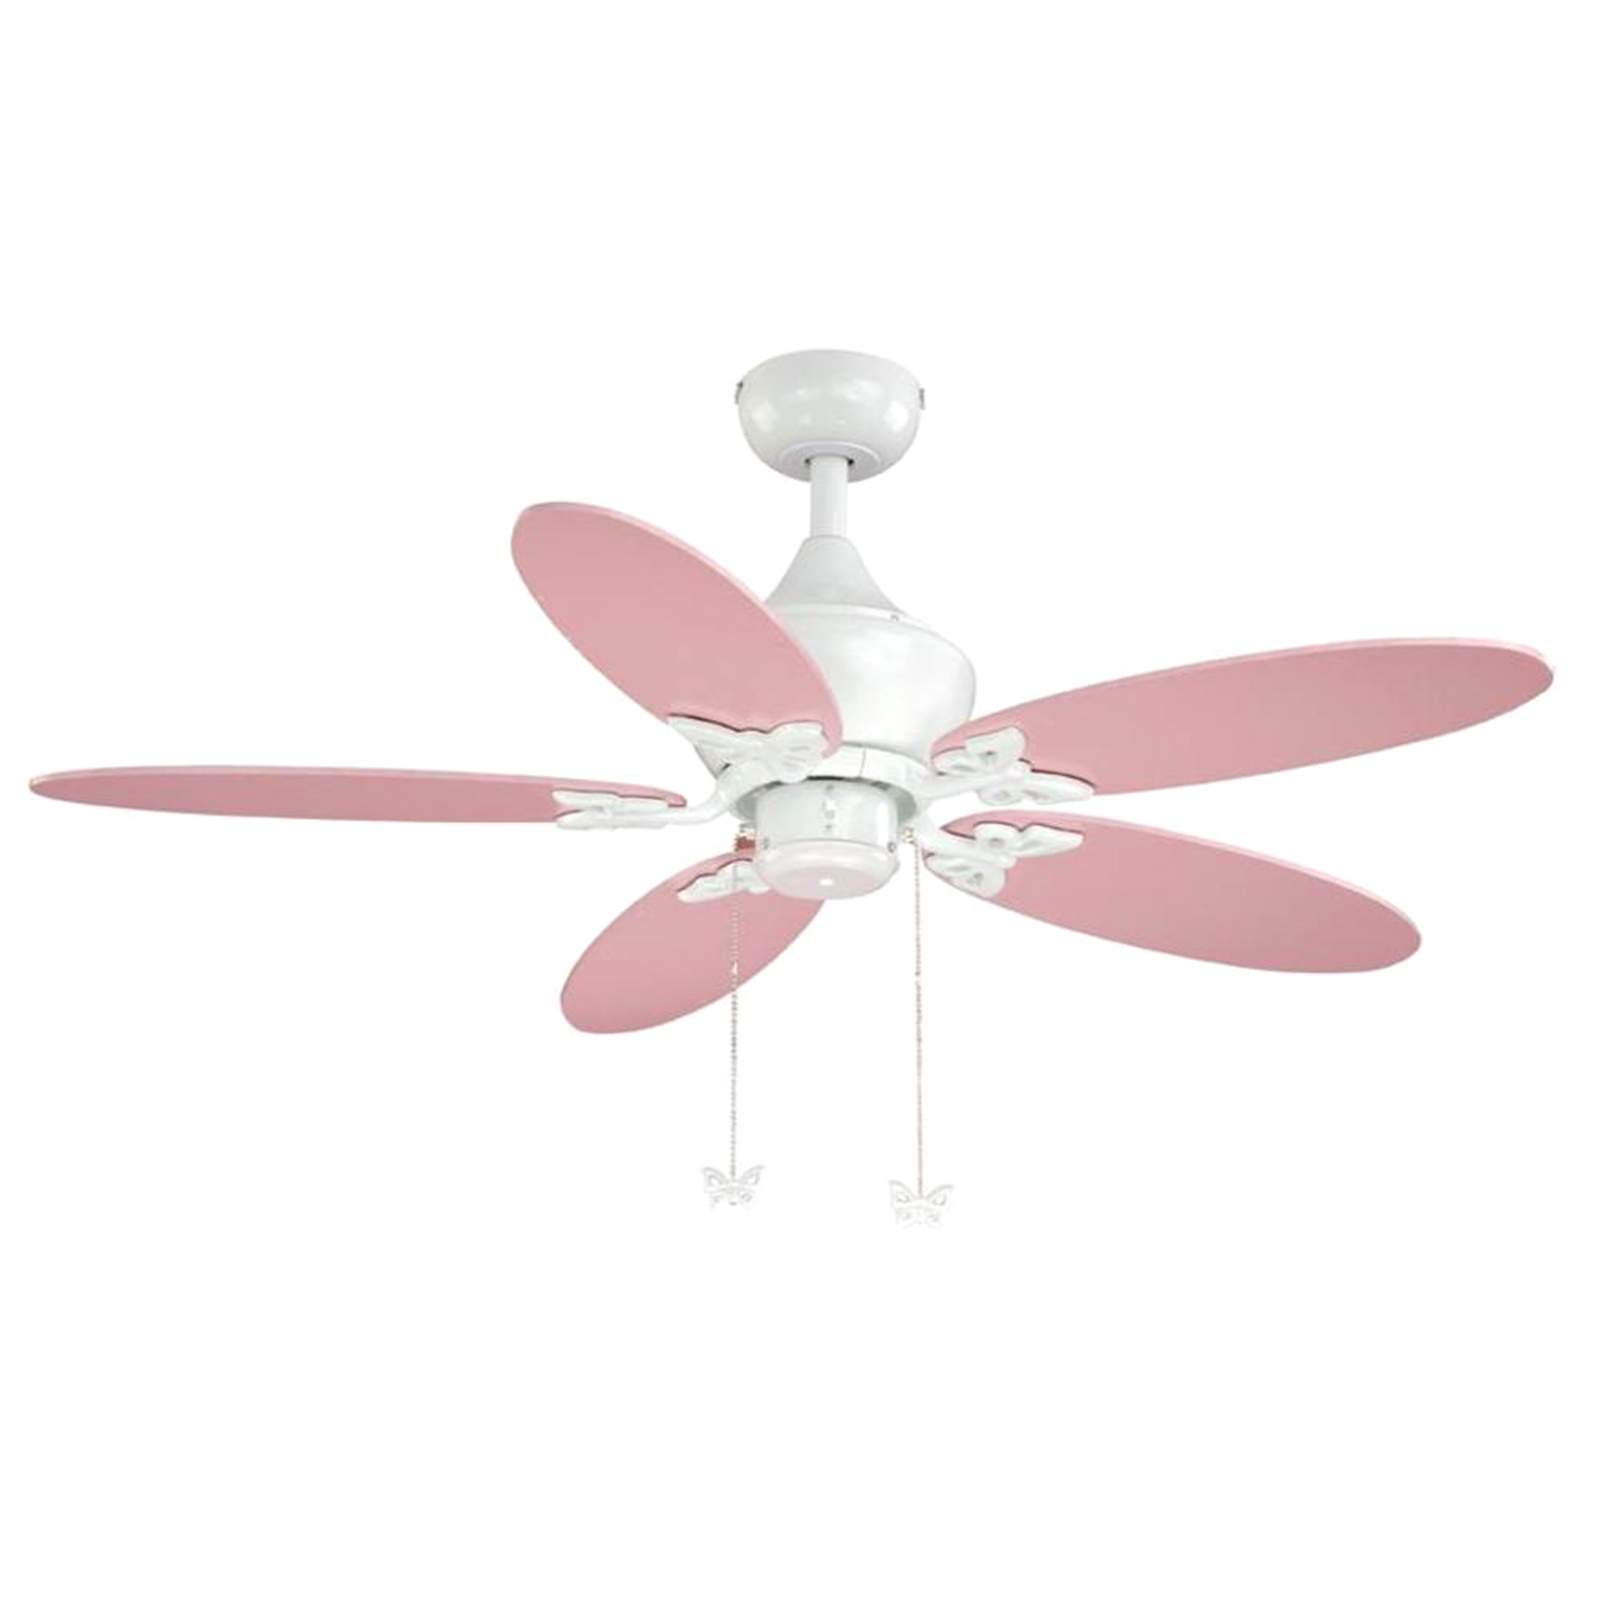 Vaxcel Lighting FN44322W AireRyder Alice 44" 5-Blade Ceiling Fan with Light - White